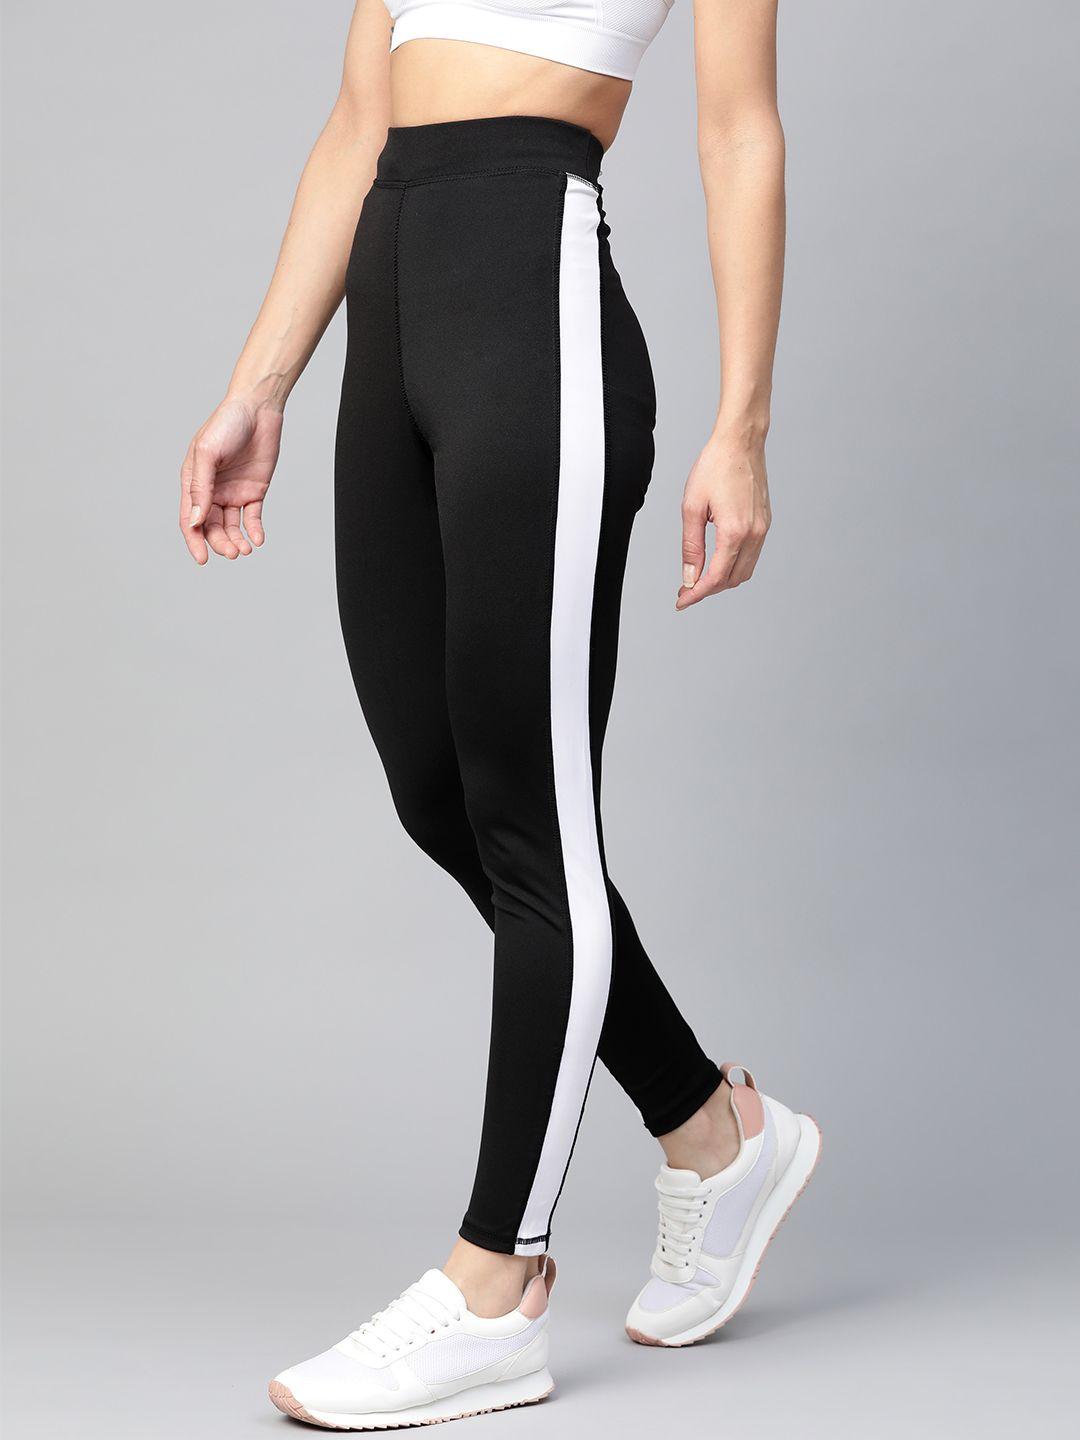 m7 by metronaut women black & white high-rise solid training tights